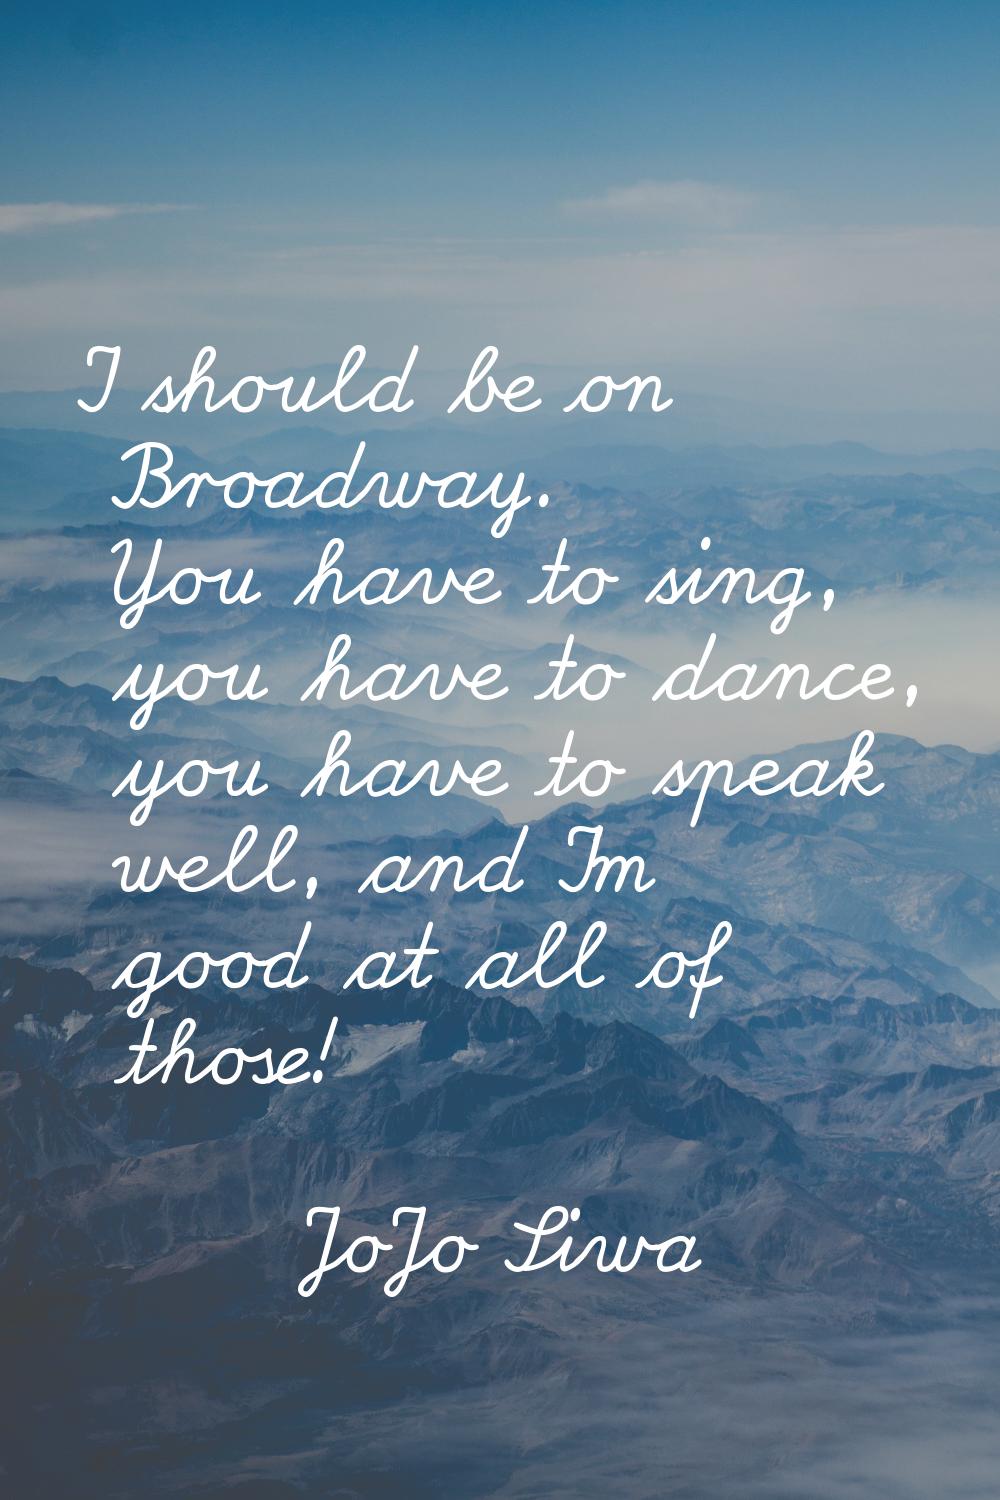 I should be on Broadway. You have to sing, you have to dance, you have to speak well, and I'm good 